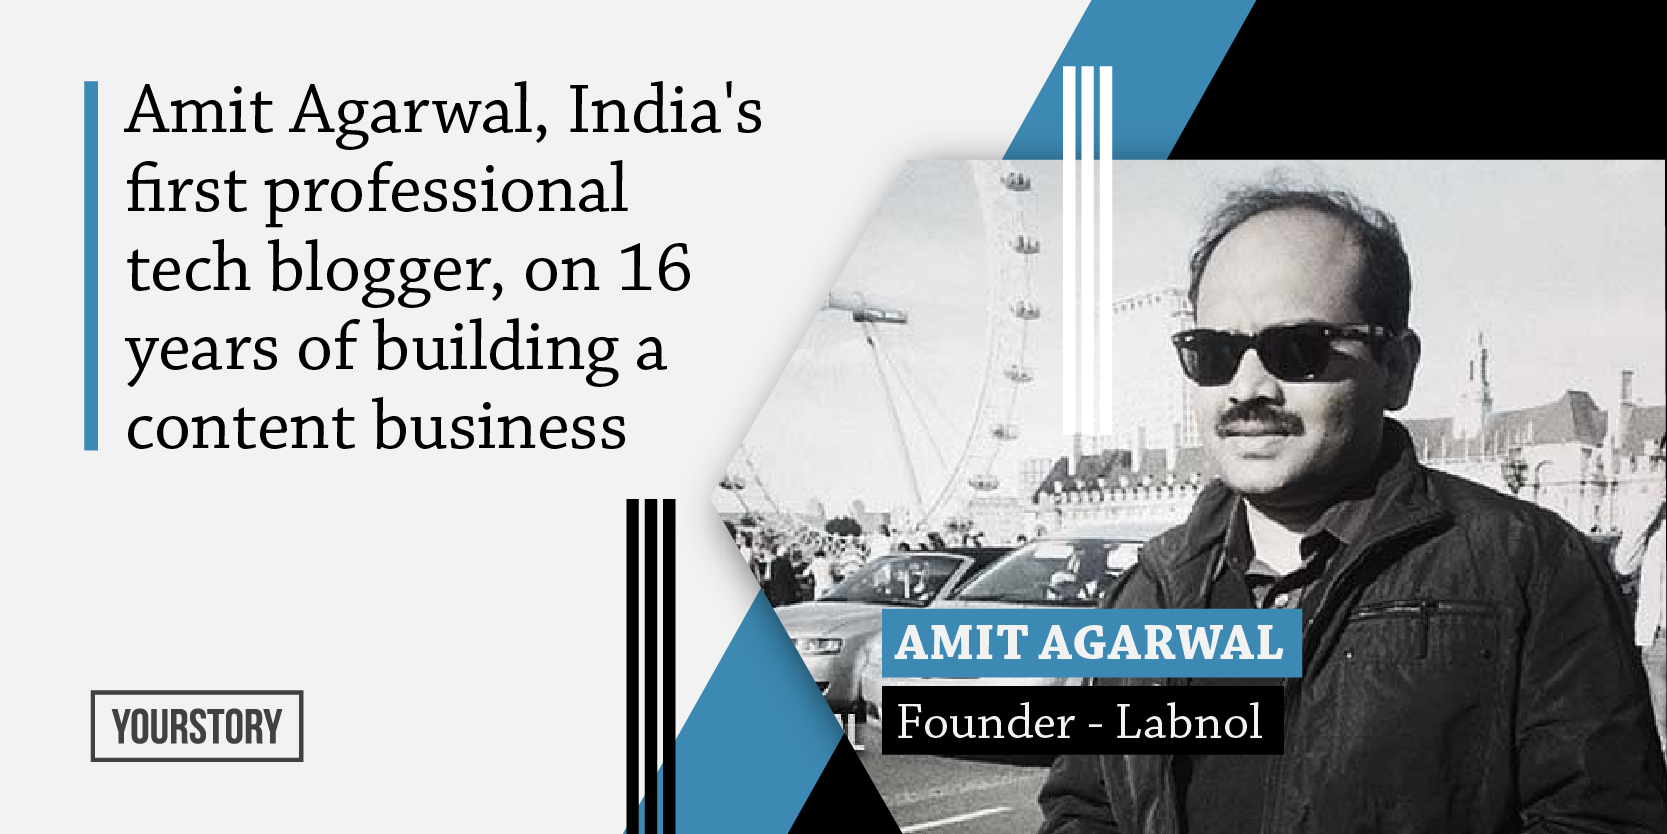 Top tech blogger Amit Agarwal on building a global content business for over 15 years